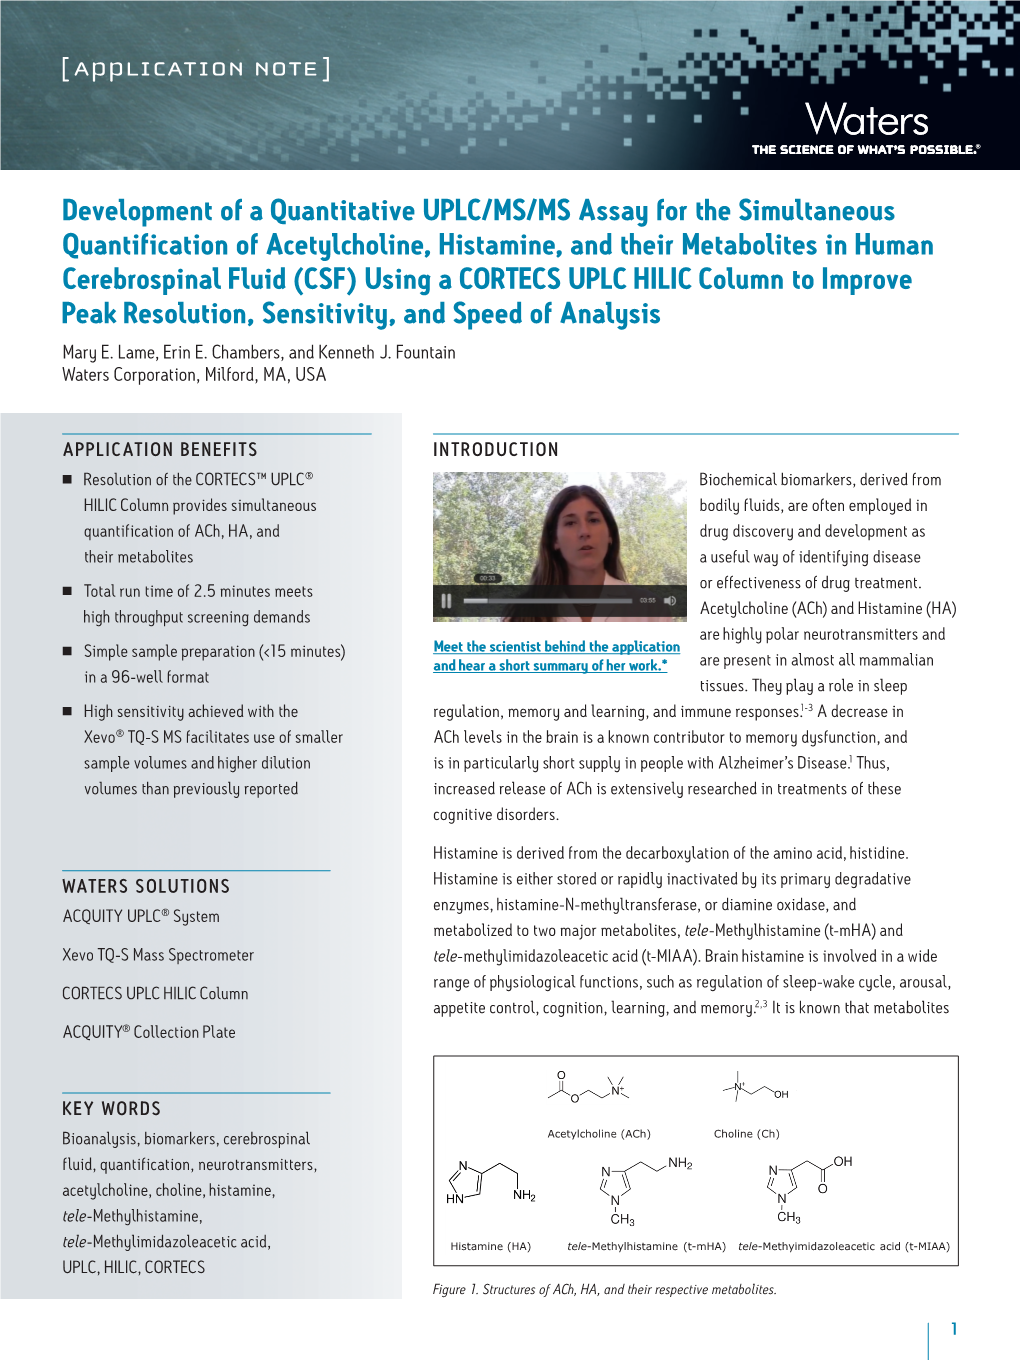 Development of a Quantitative UPLC/MS/MS Assay for the Simultaneous Quantification of Acetylcholine, Histamine, and Their Metabo